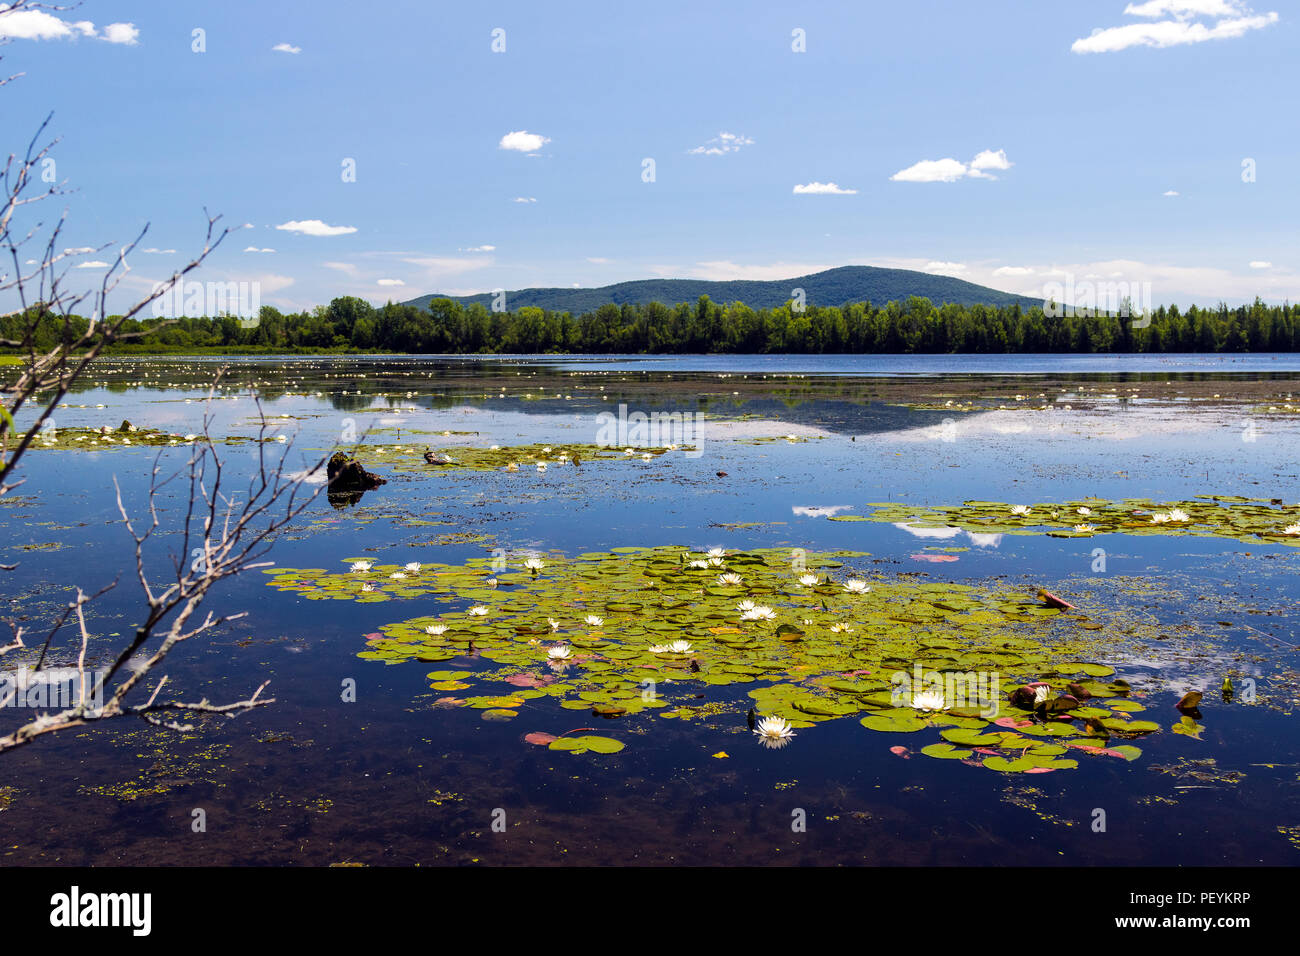 Nature around Lac Boivin in Granby, Eastern Townships, Quebec, Canada. White water lilies abound during summer. Mount Shefford in the background Stock Photo